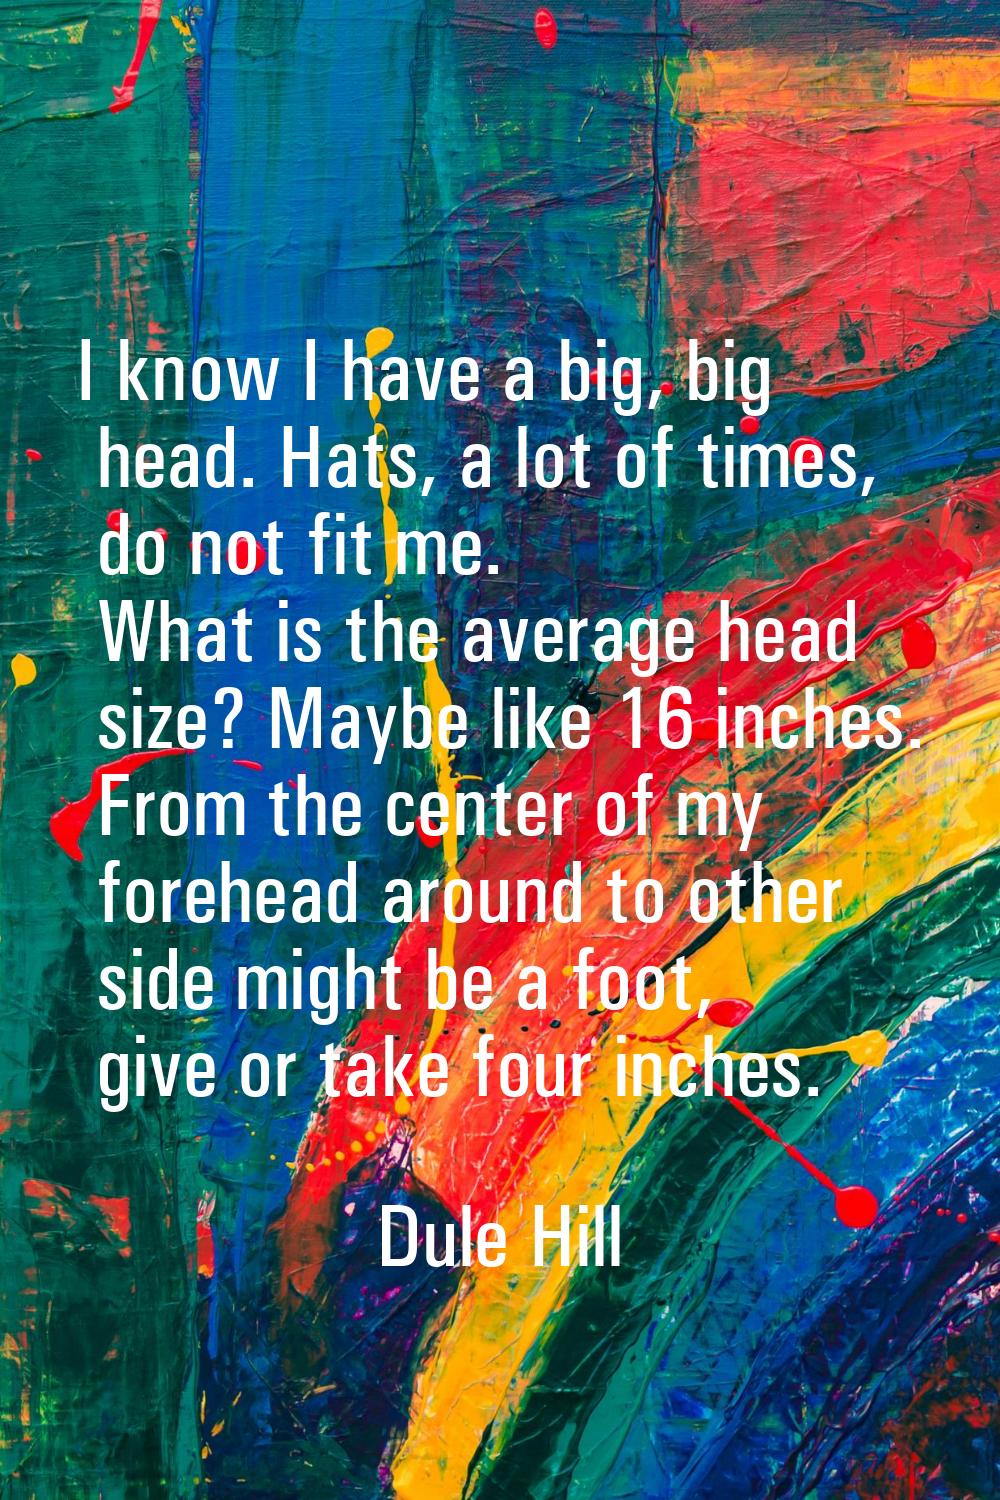 I know I have a big, big head. Hats, a lot of times, do not fit me. What is the average head size? 